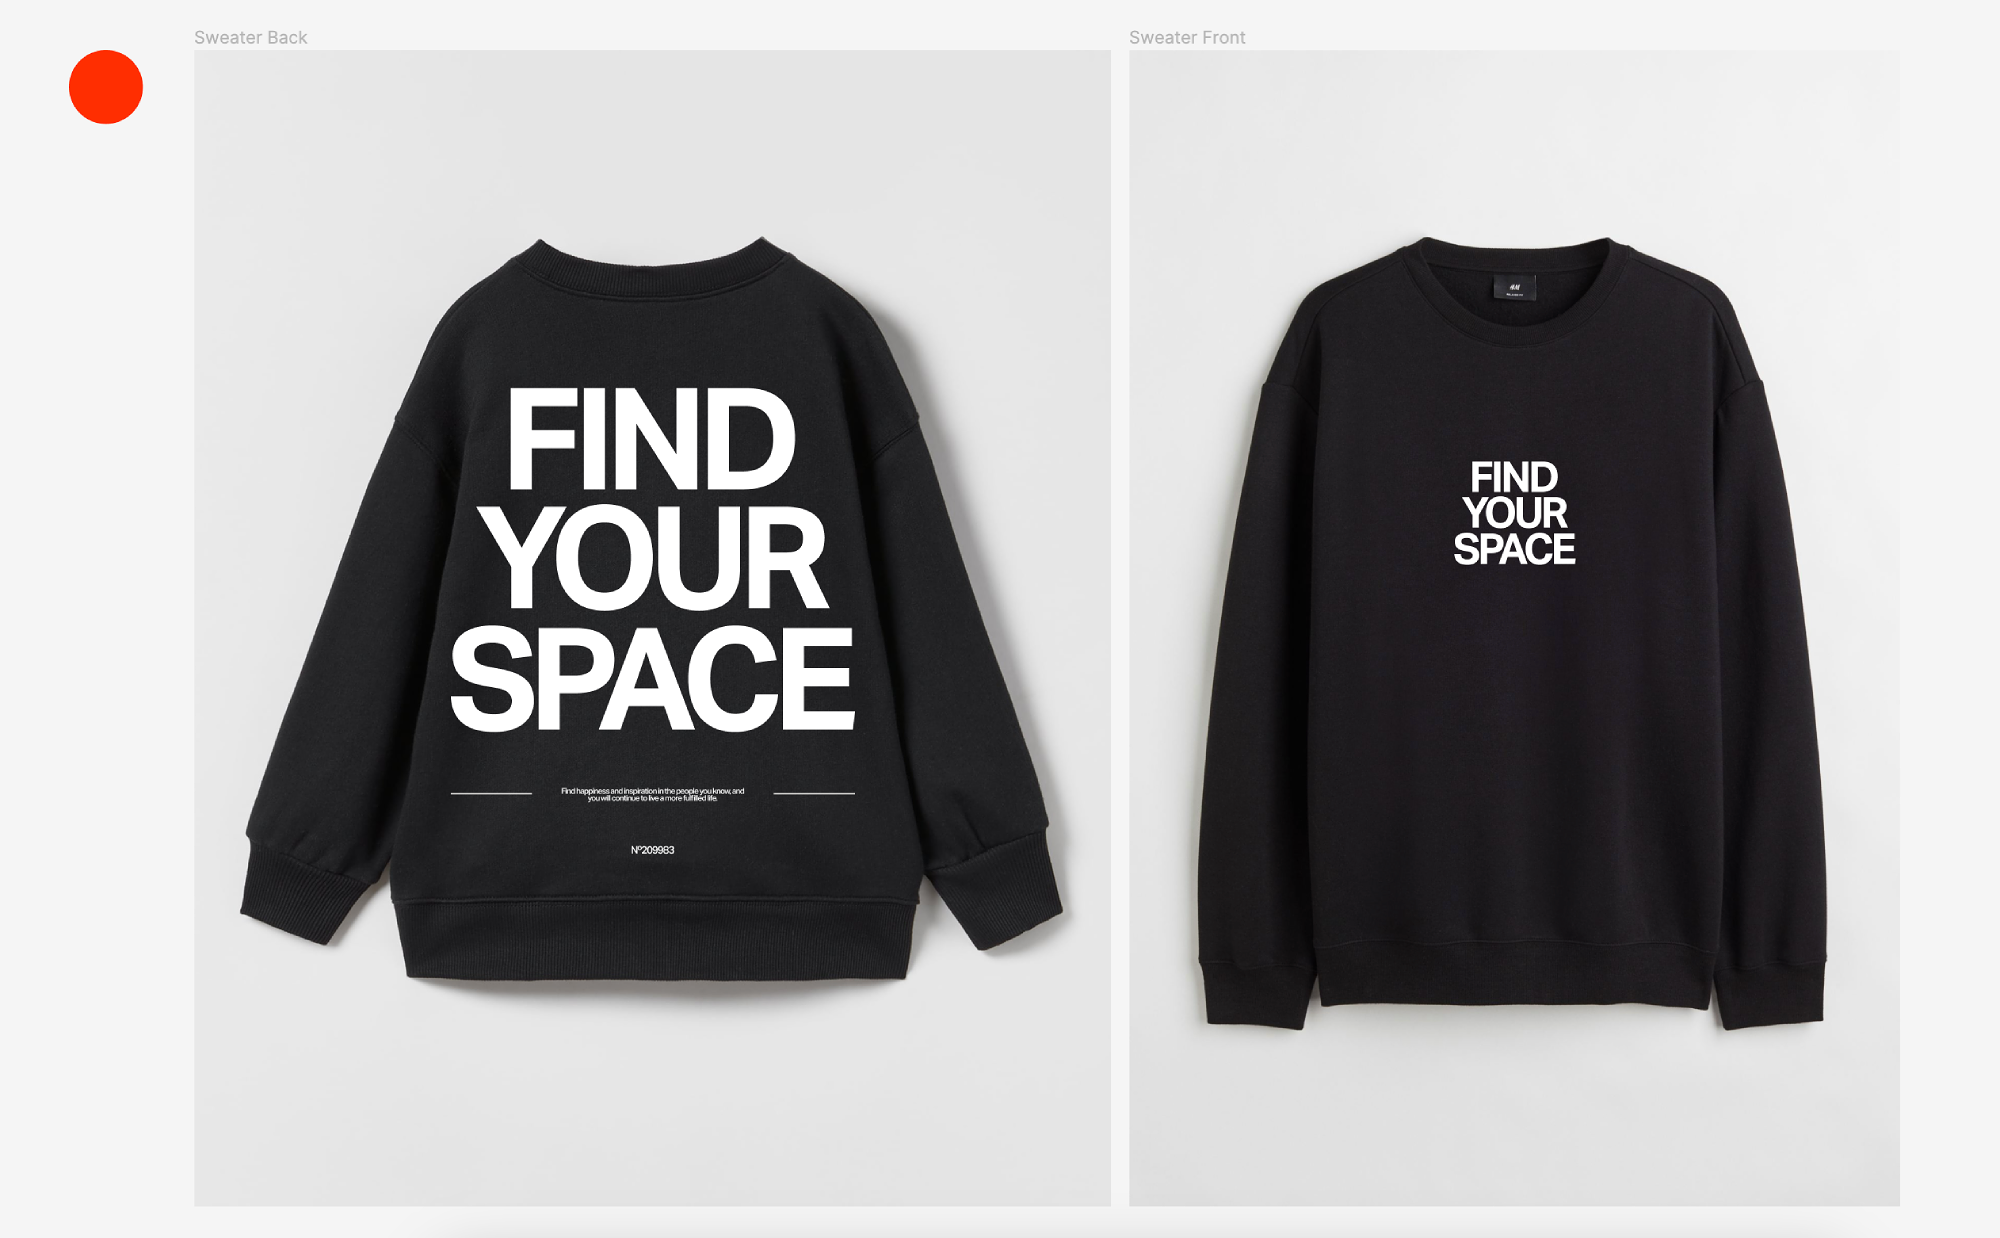 A sweater with “Find your space” captions on its front and its back